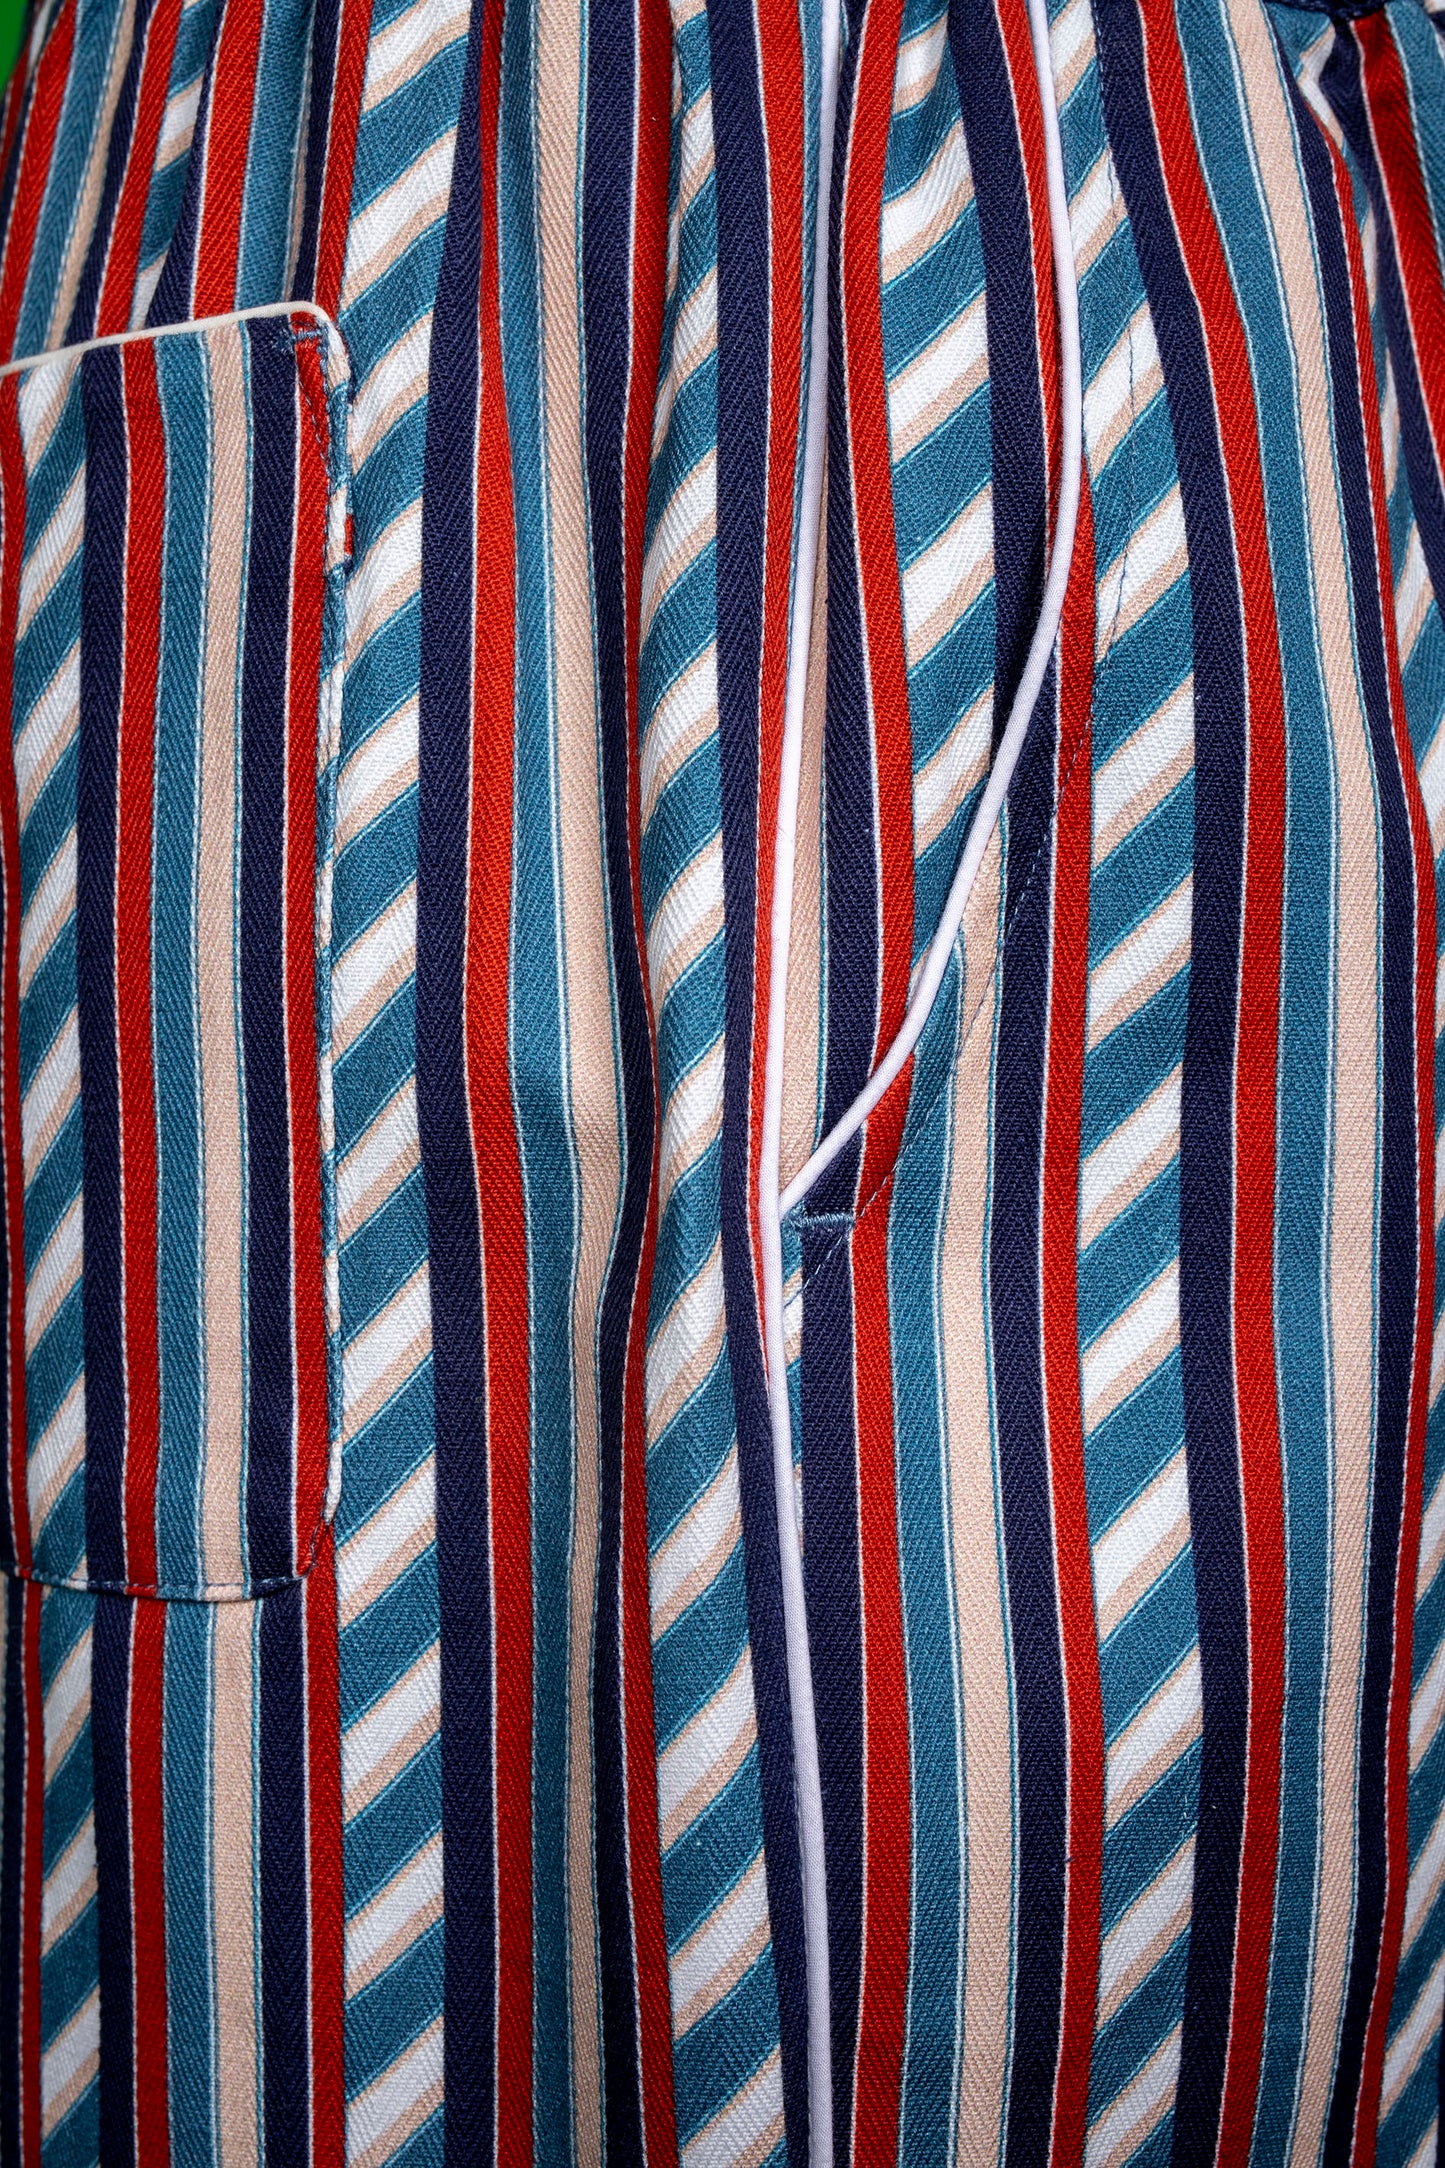 9070_BUTTON-TROUSERS_FRANCE